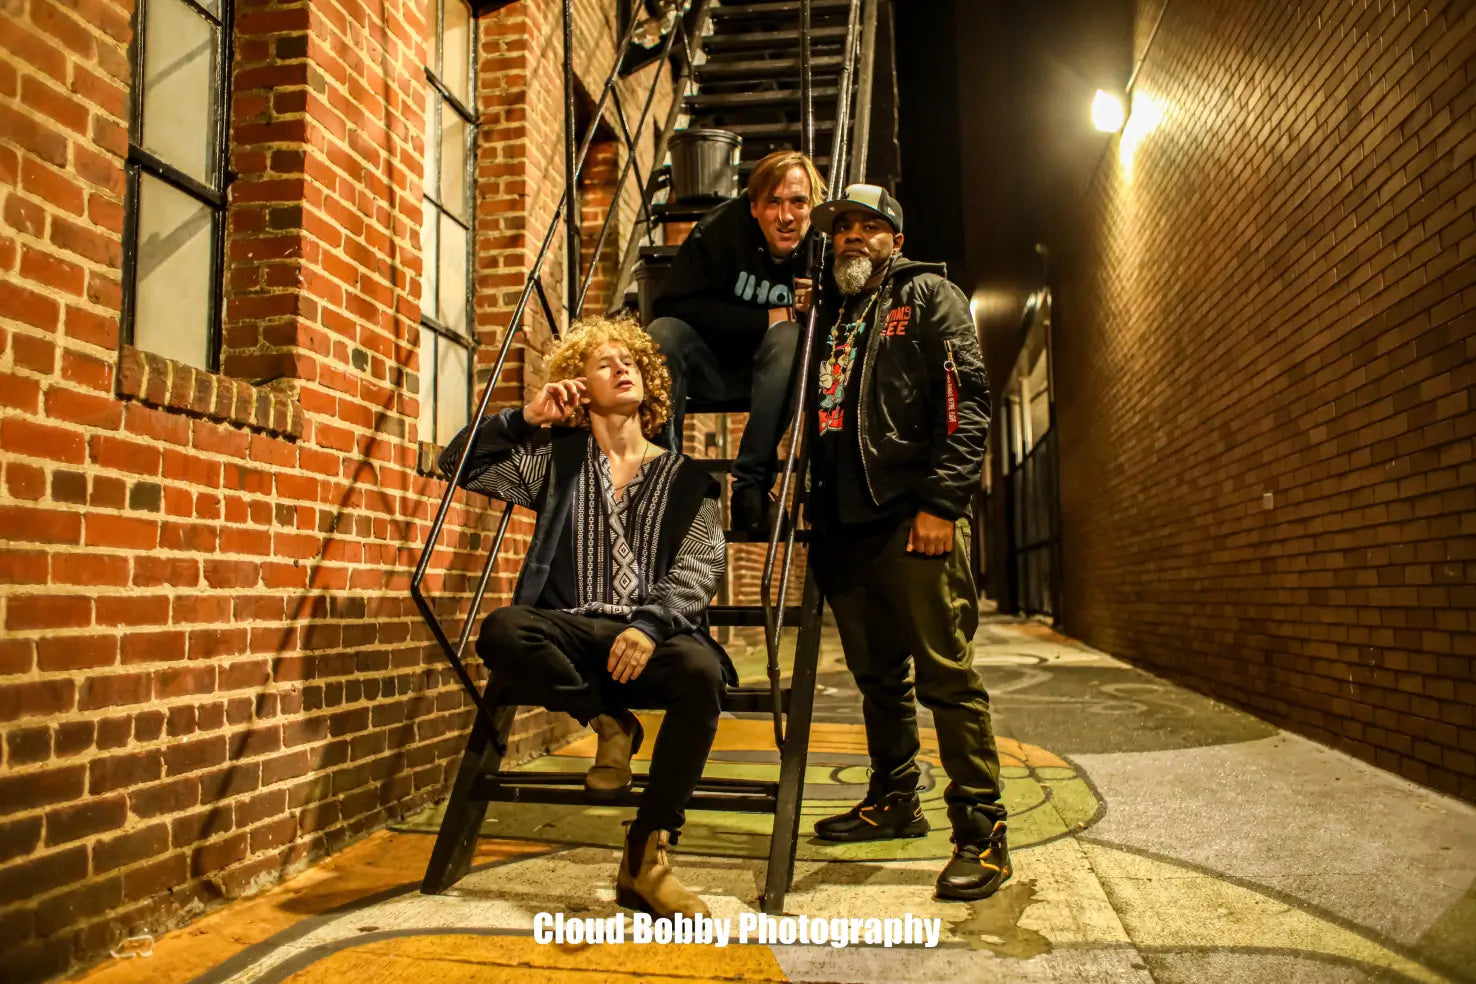 The Isaac Hadden Organ Trio posing for the camera in a back alley way under a street light.